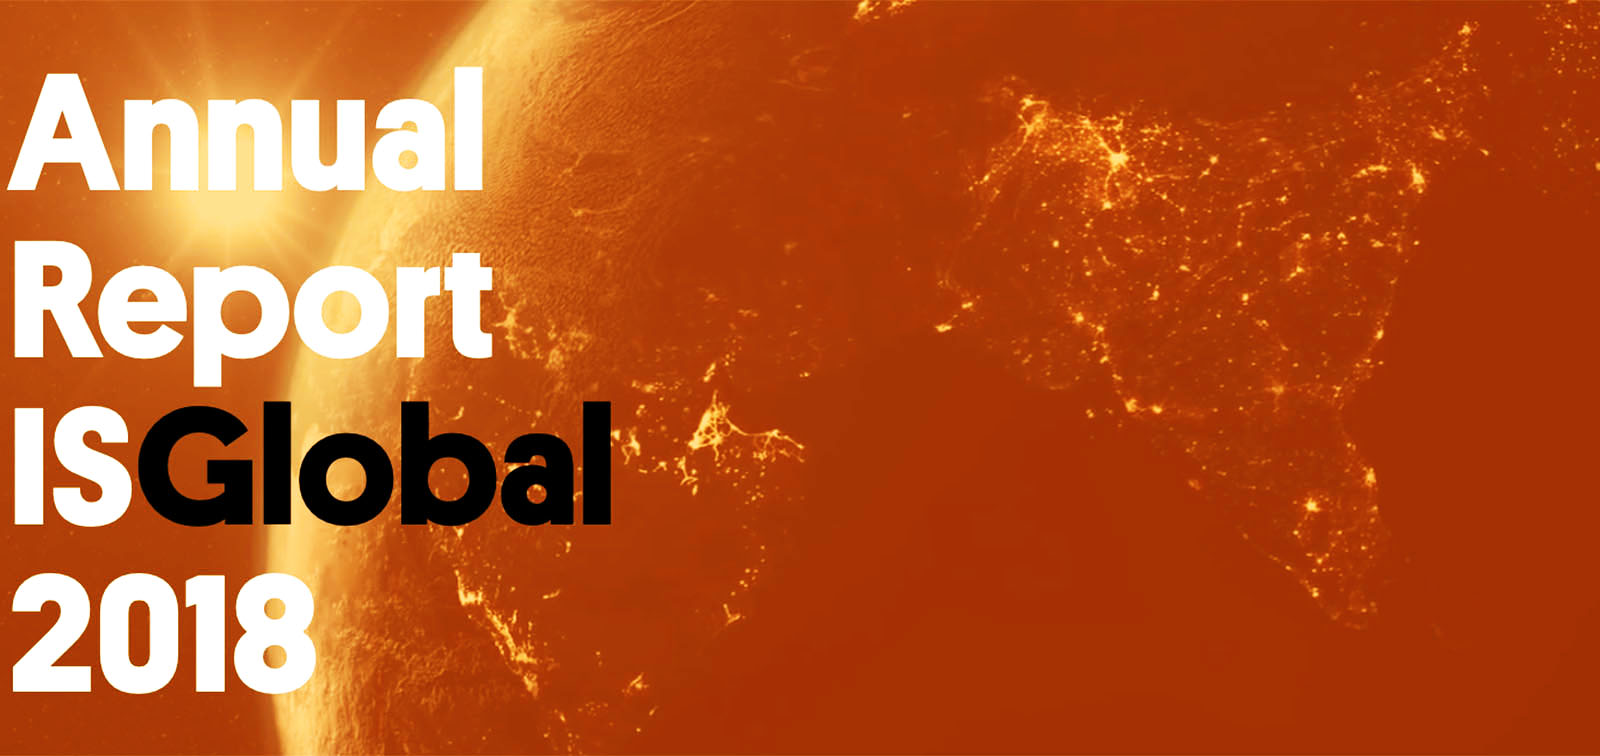 Annual Report ISGlobal 2018